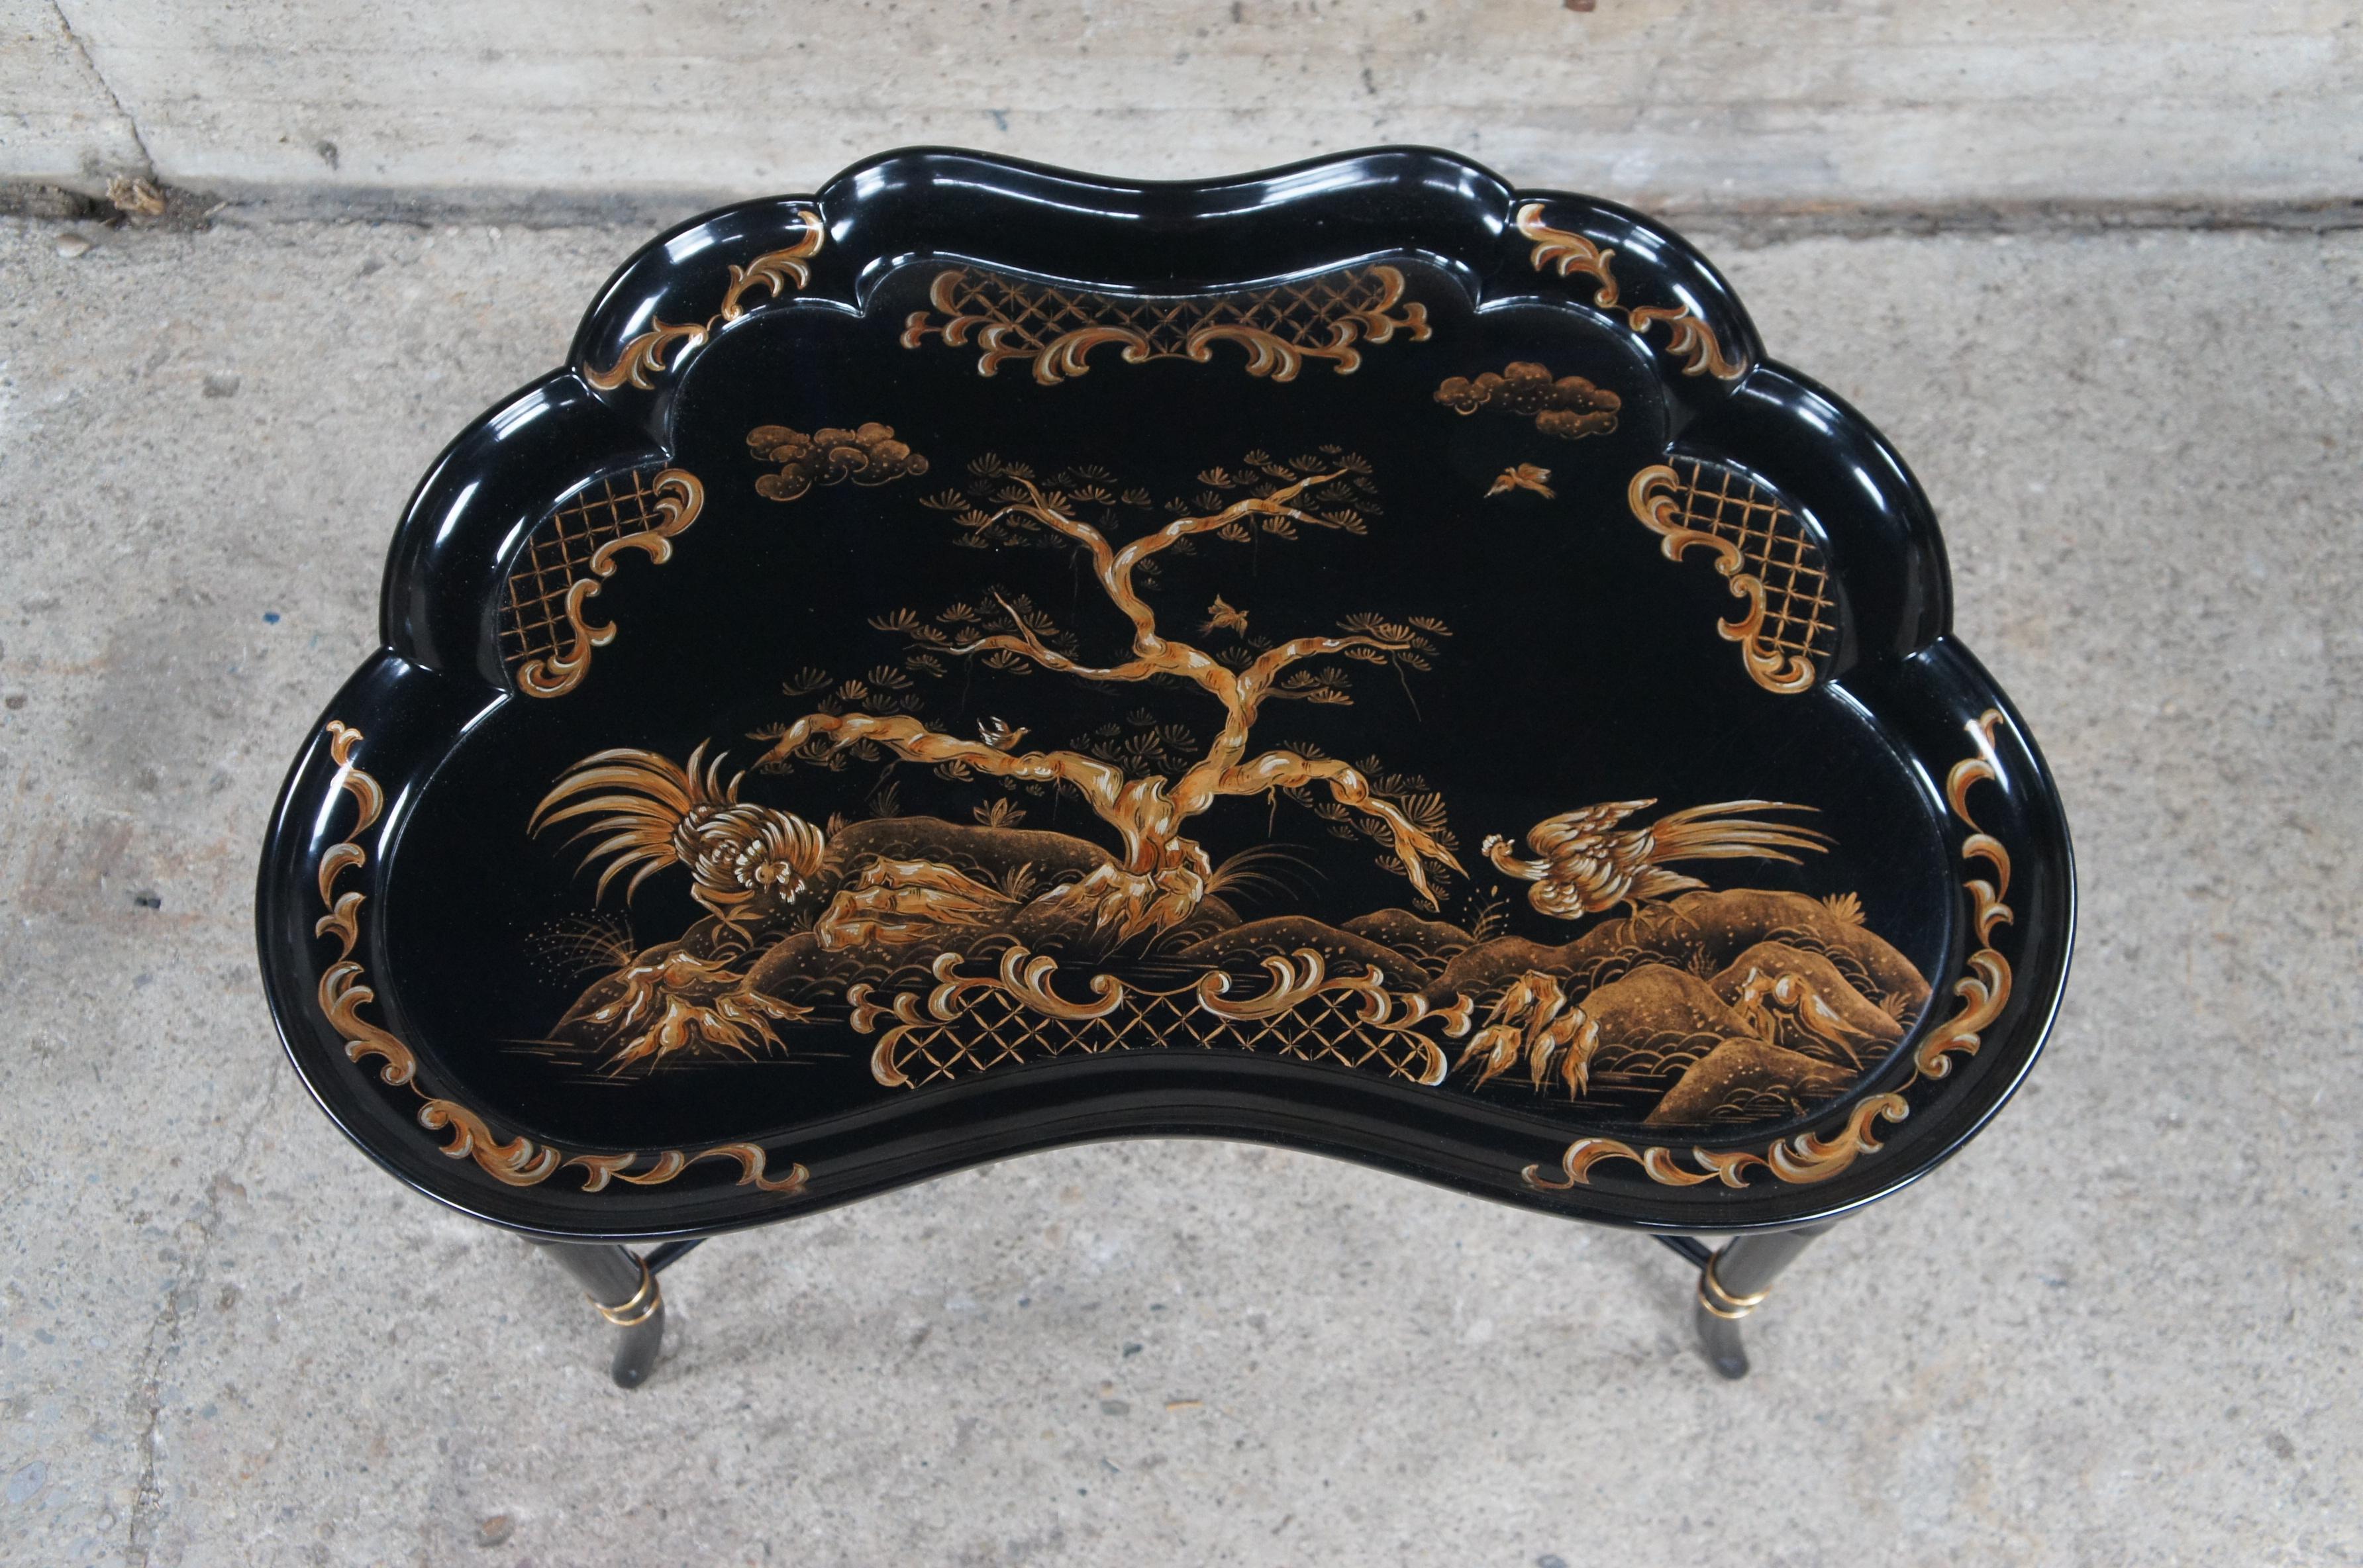 Faux Bamboo 2 Vintage Karges Black lacquer Regency Chinoiserie Butterfly Tea Tray Tables 30